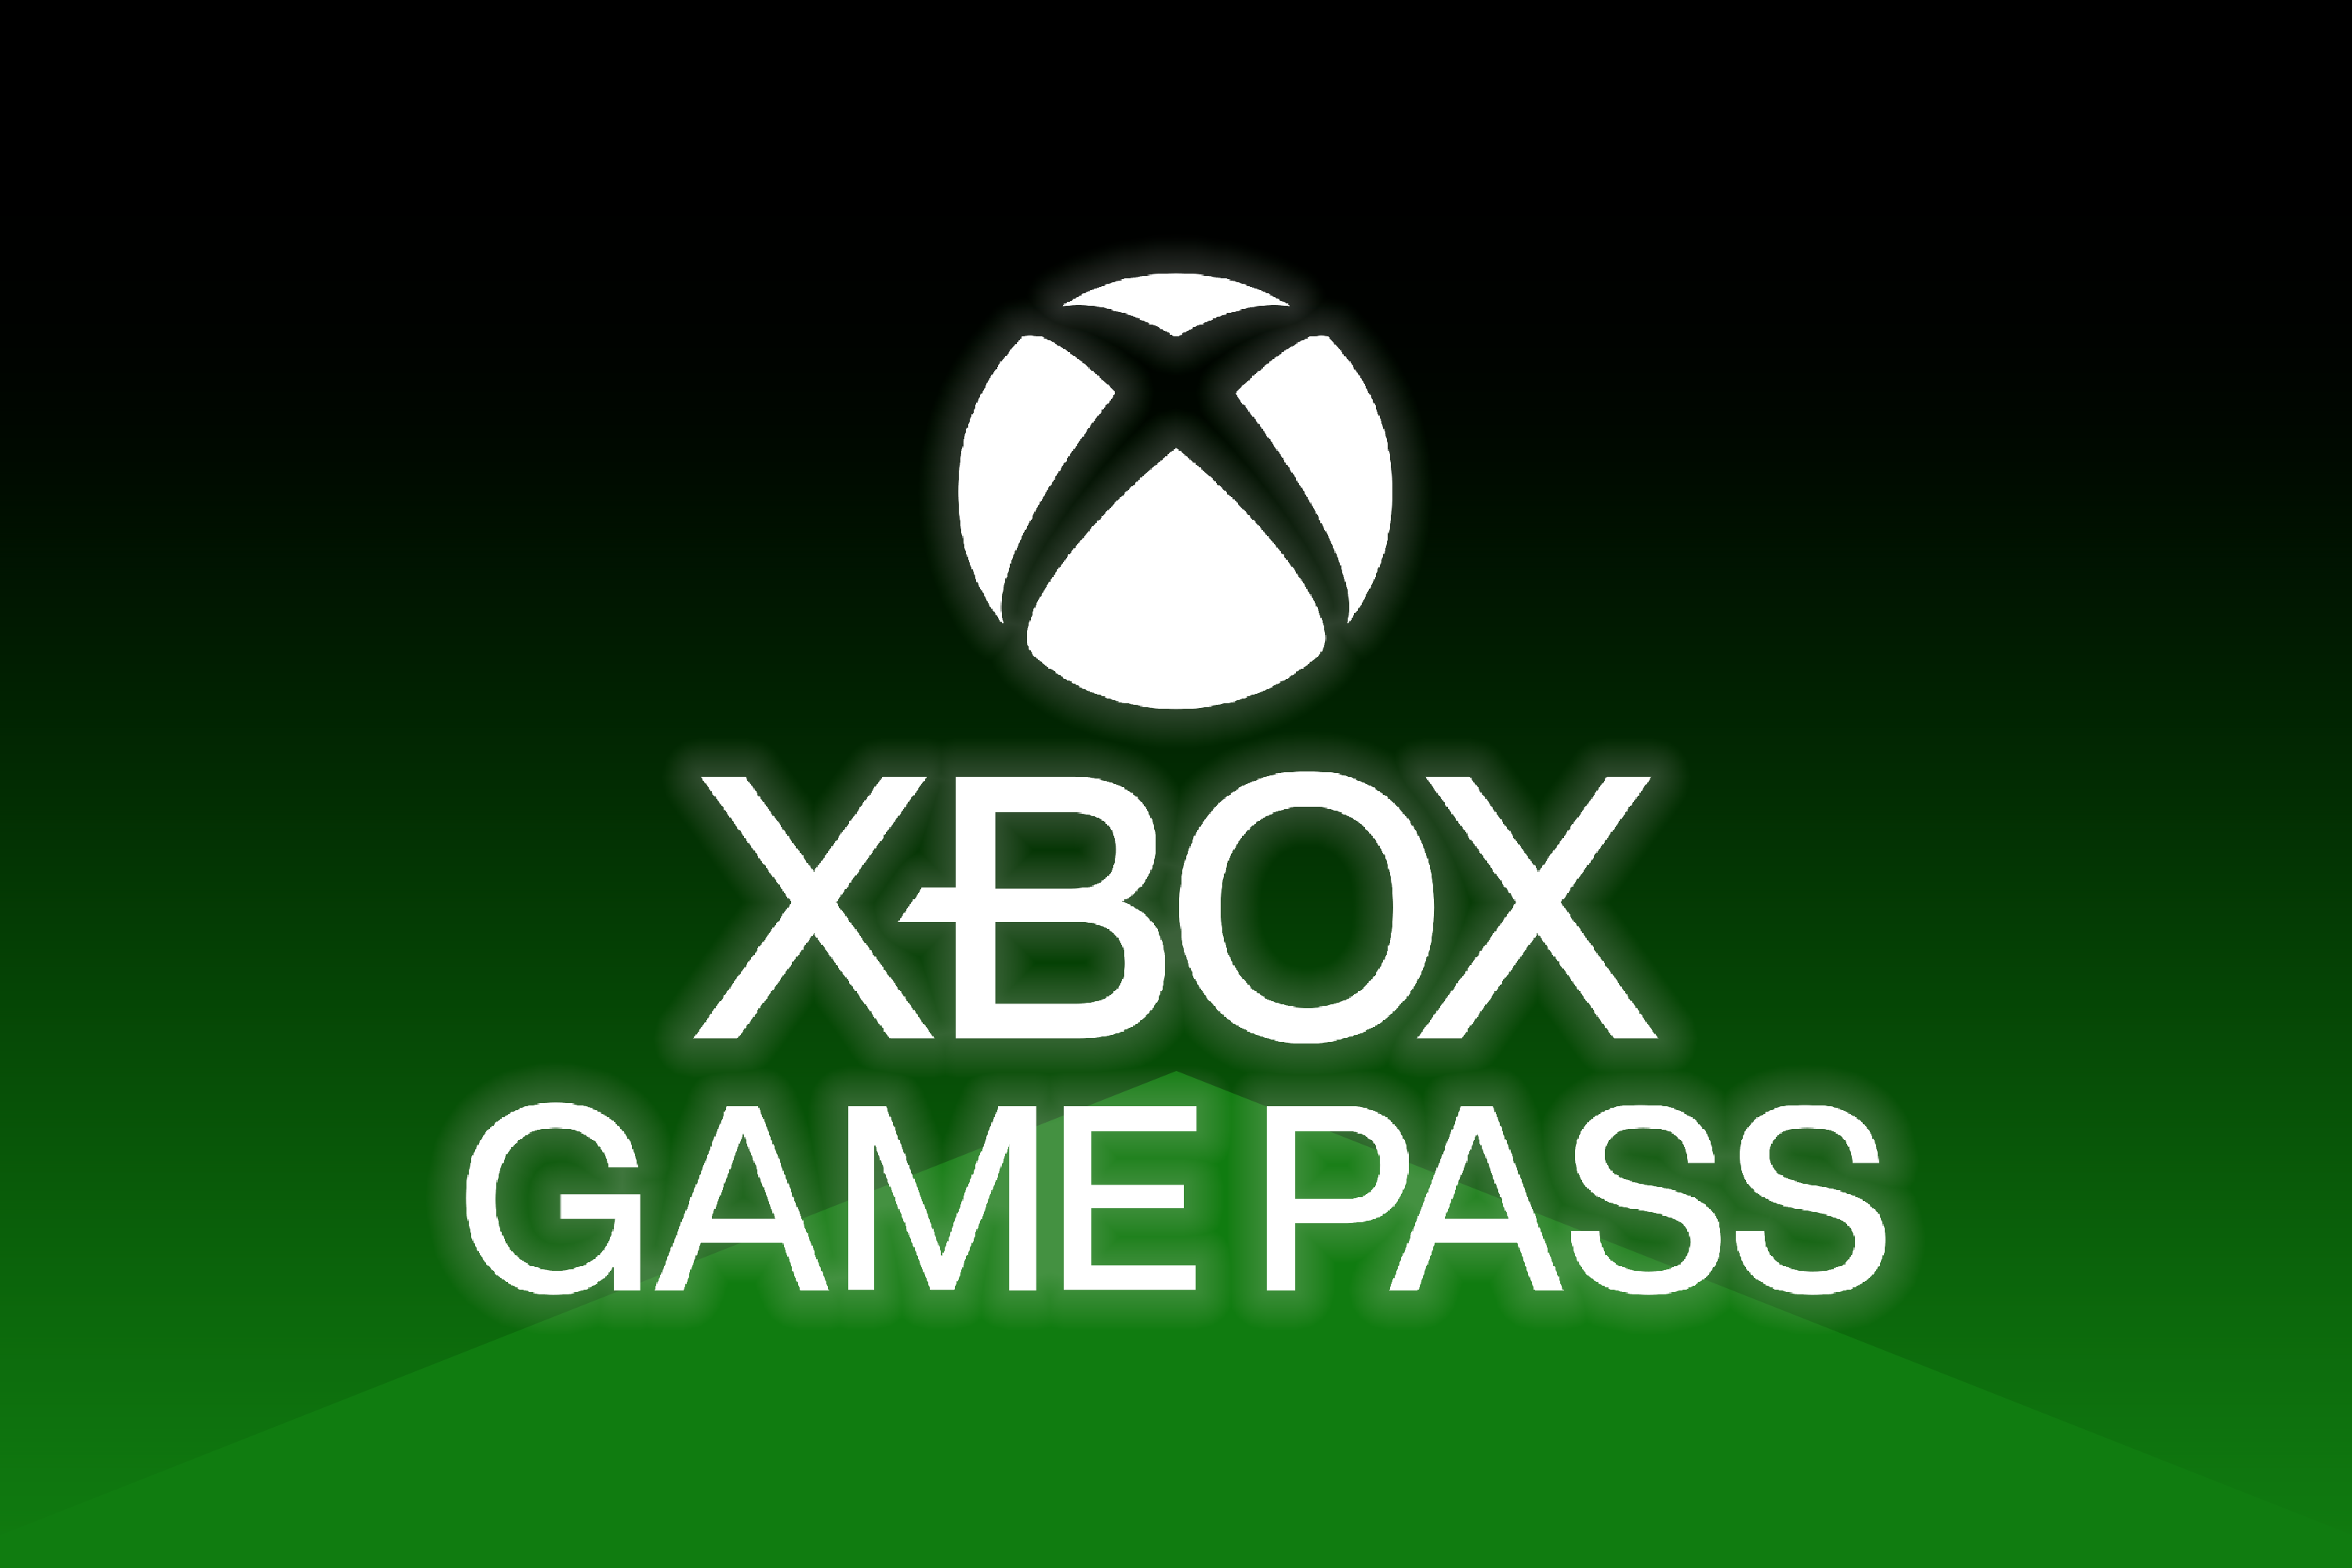 Xbox Game Pass How To Play on Mobile - How To Setup Xbox Game Pass on  Android Instructions, Guide 